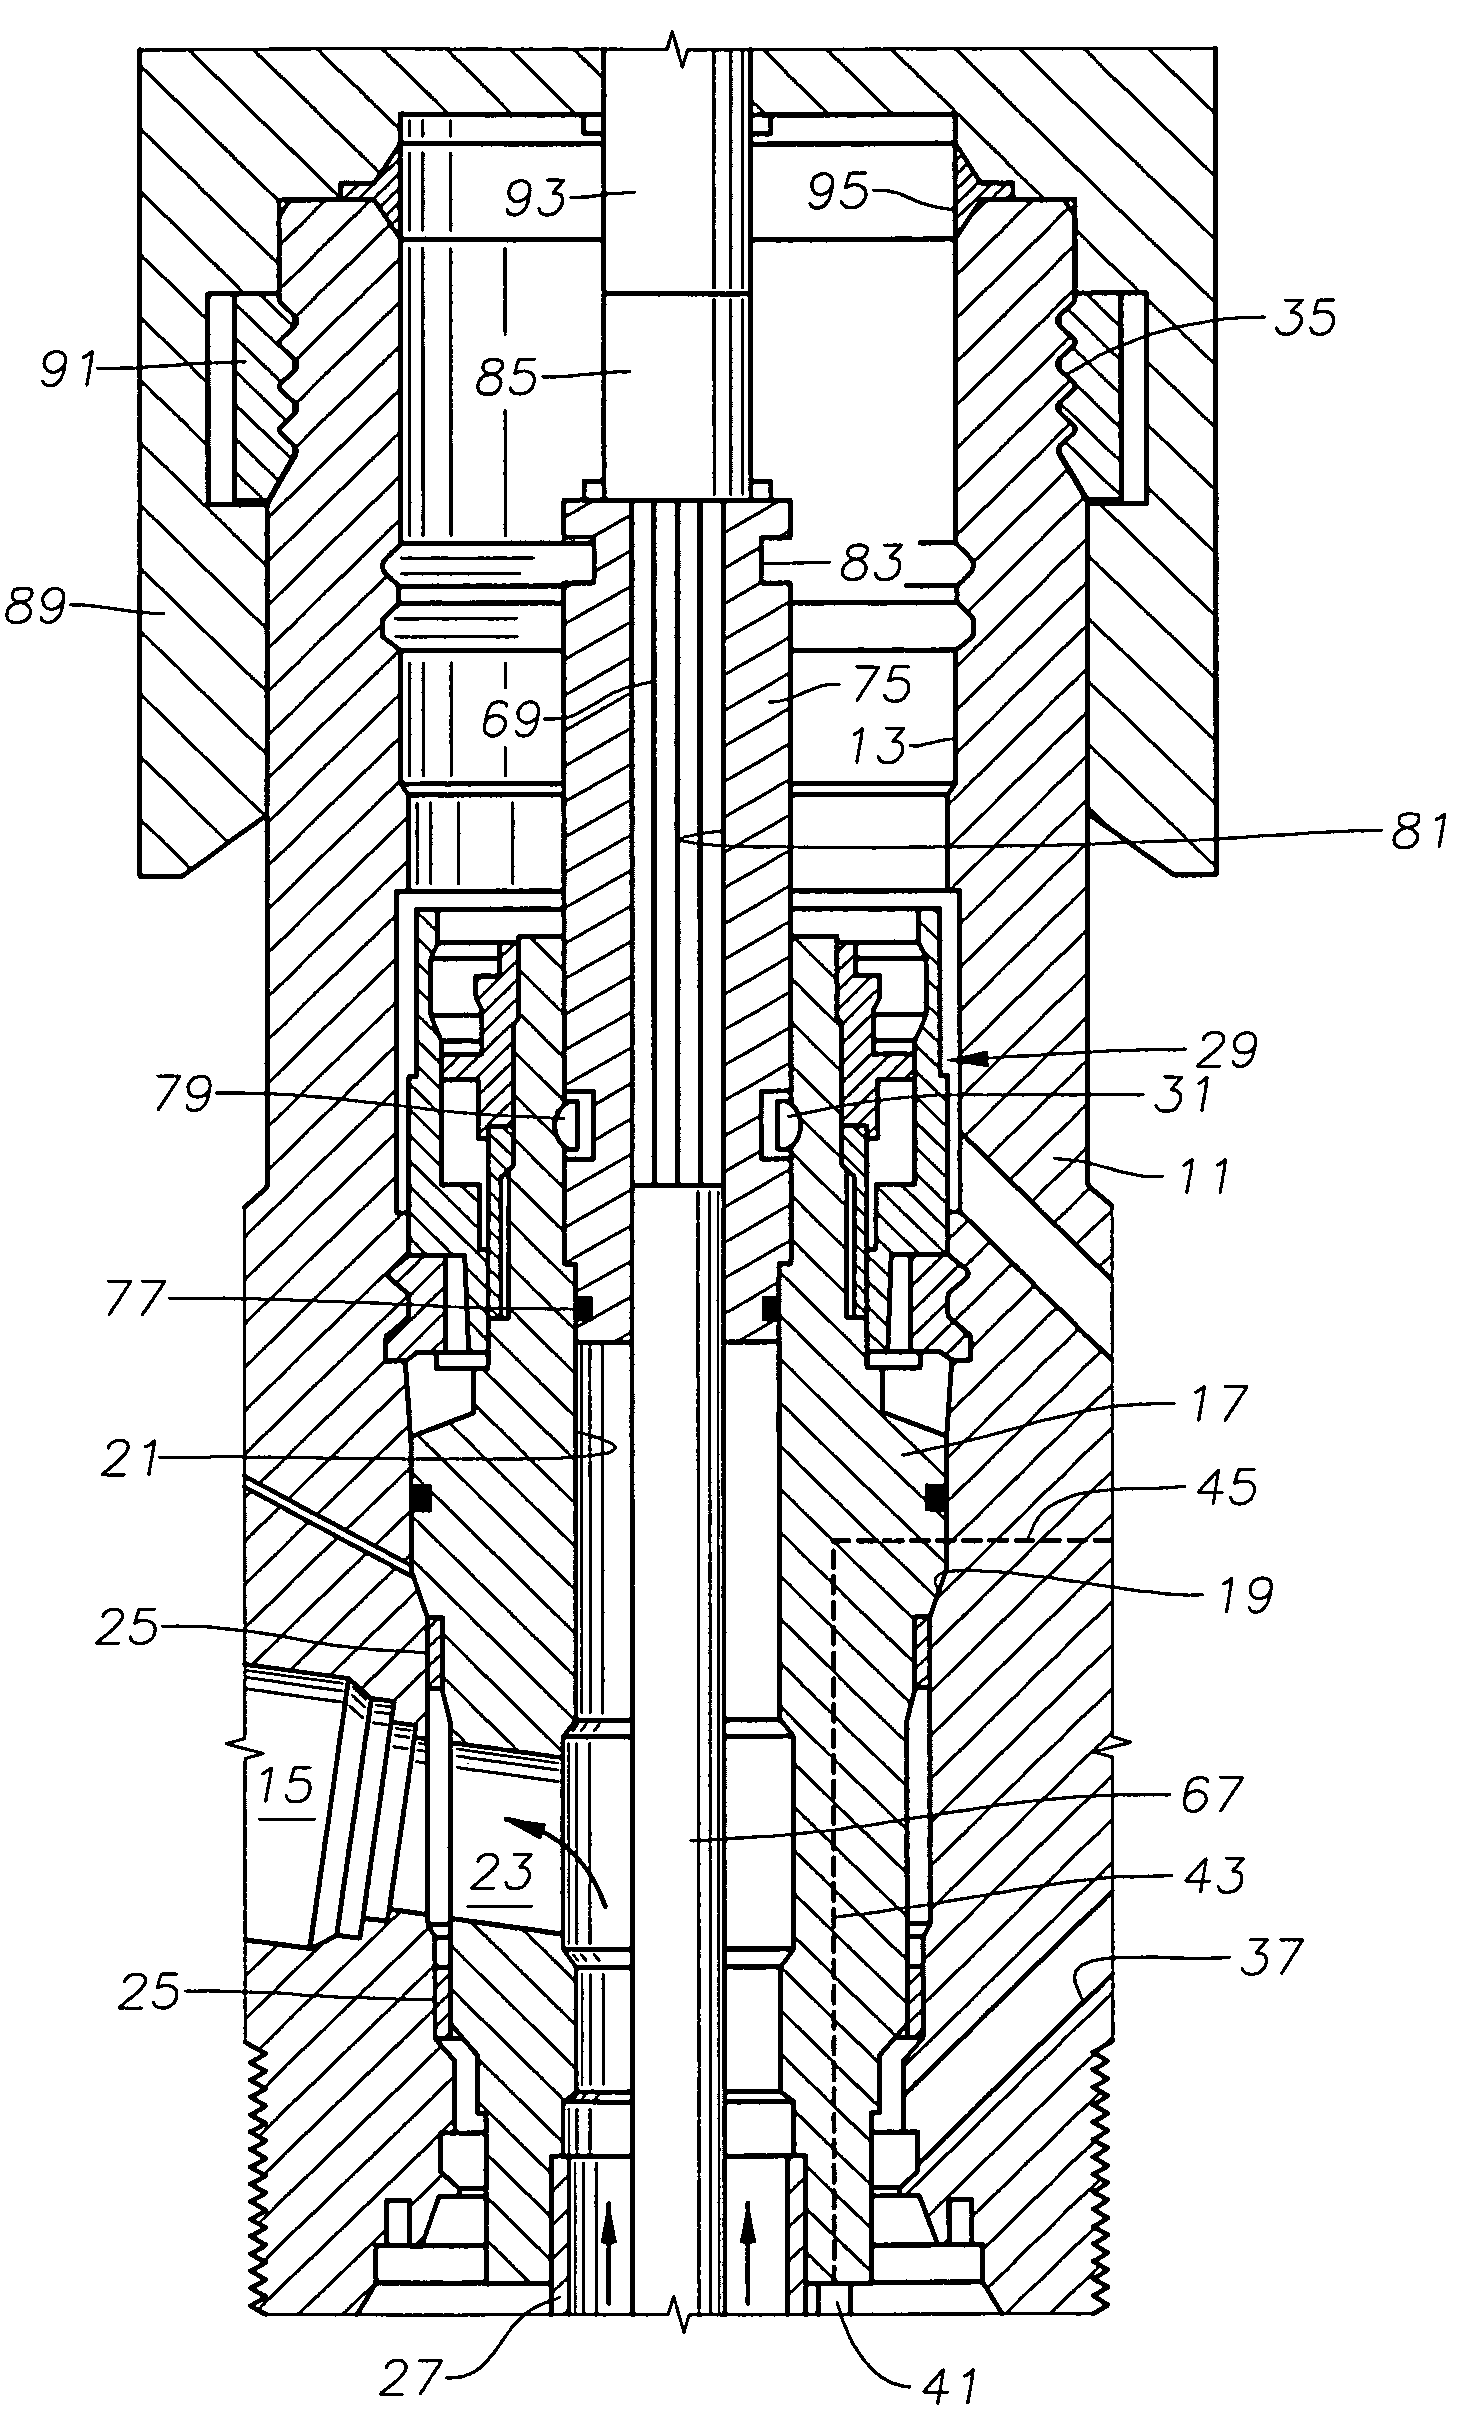 Subsea well with electrical submersible pump above downhole safety valve